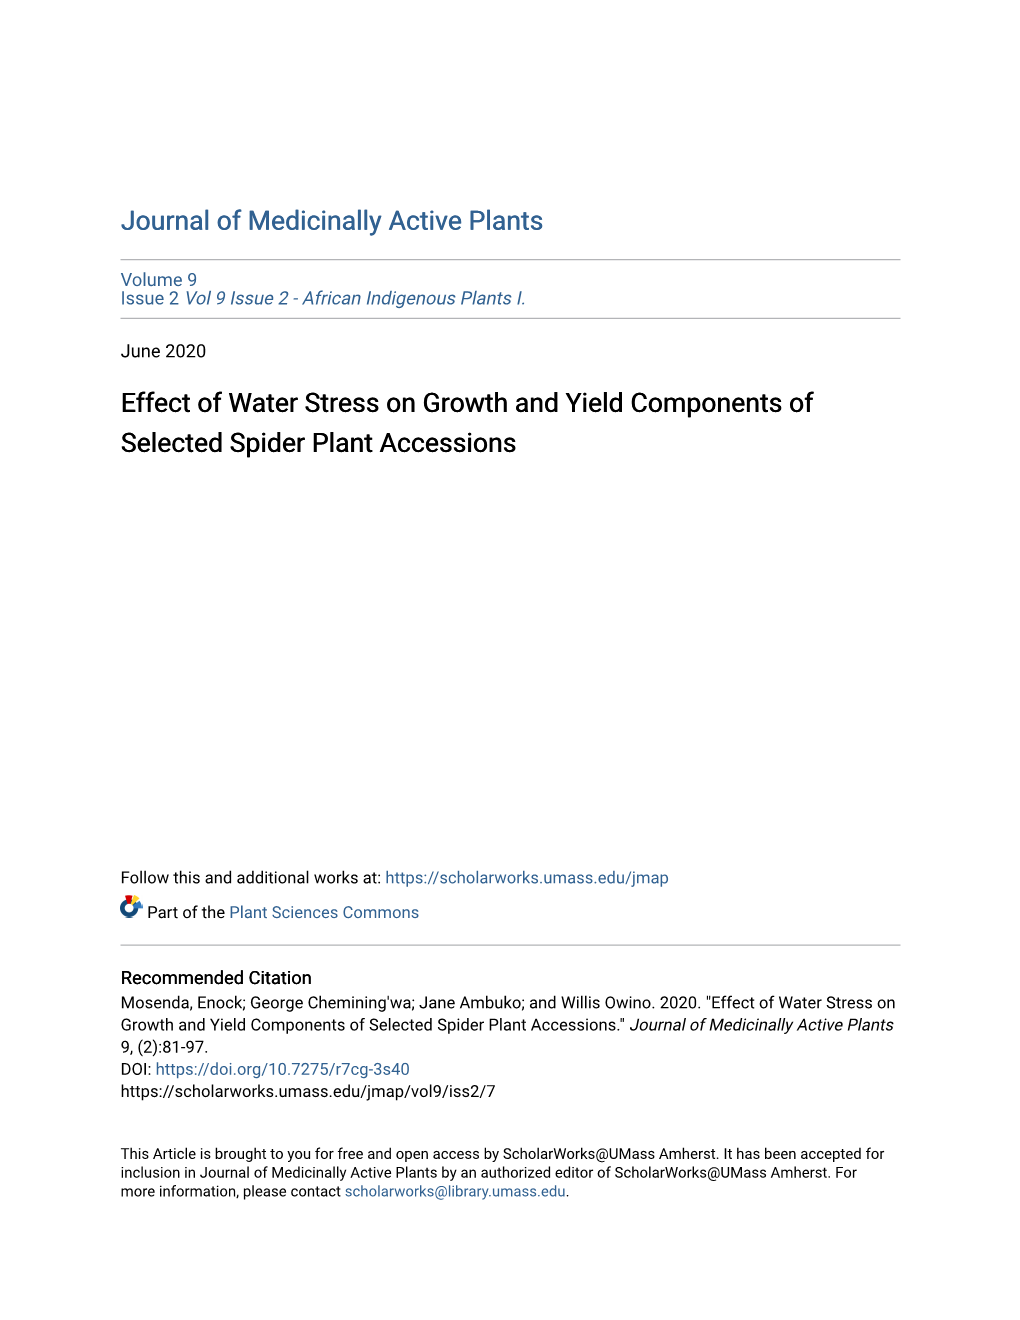 Effect of Water Stress on Growth and Yield Components of Selected Spider Plant Accessions